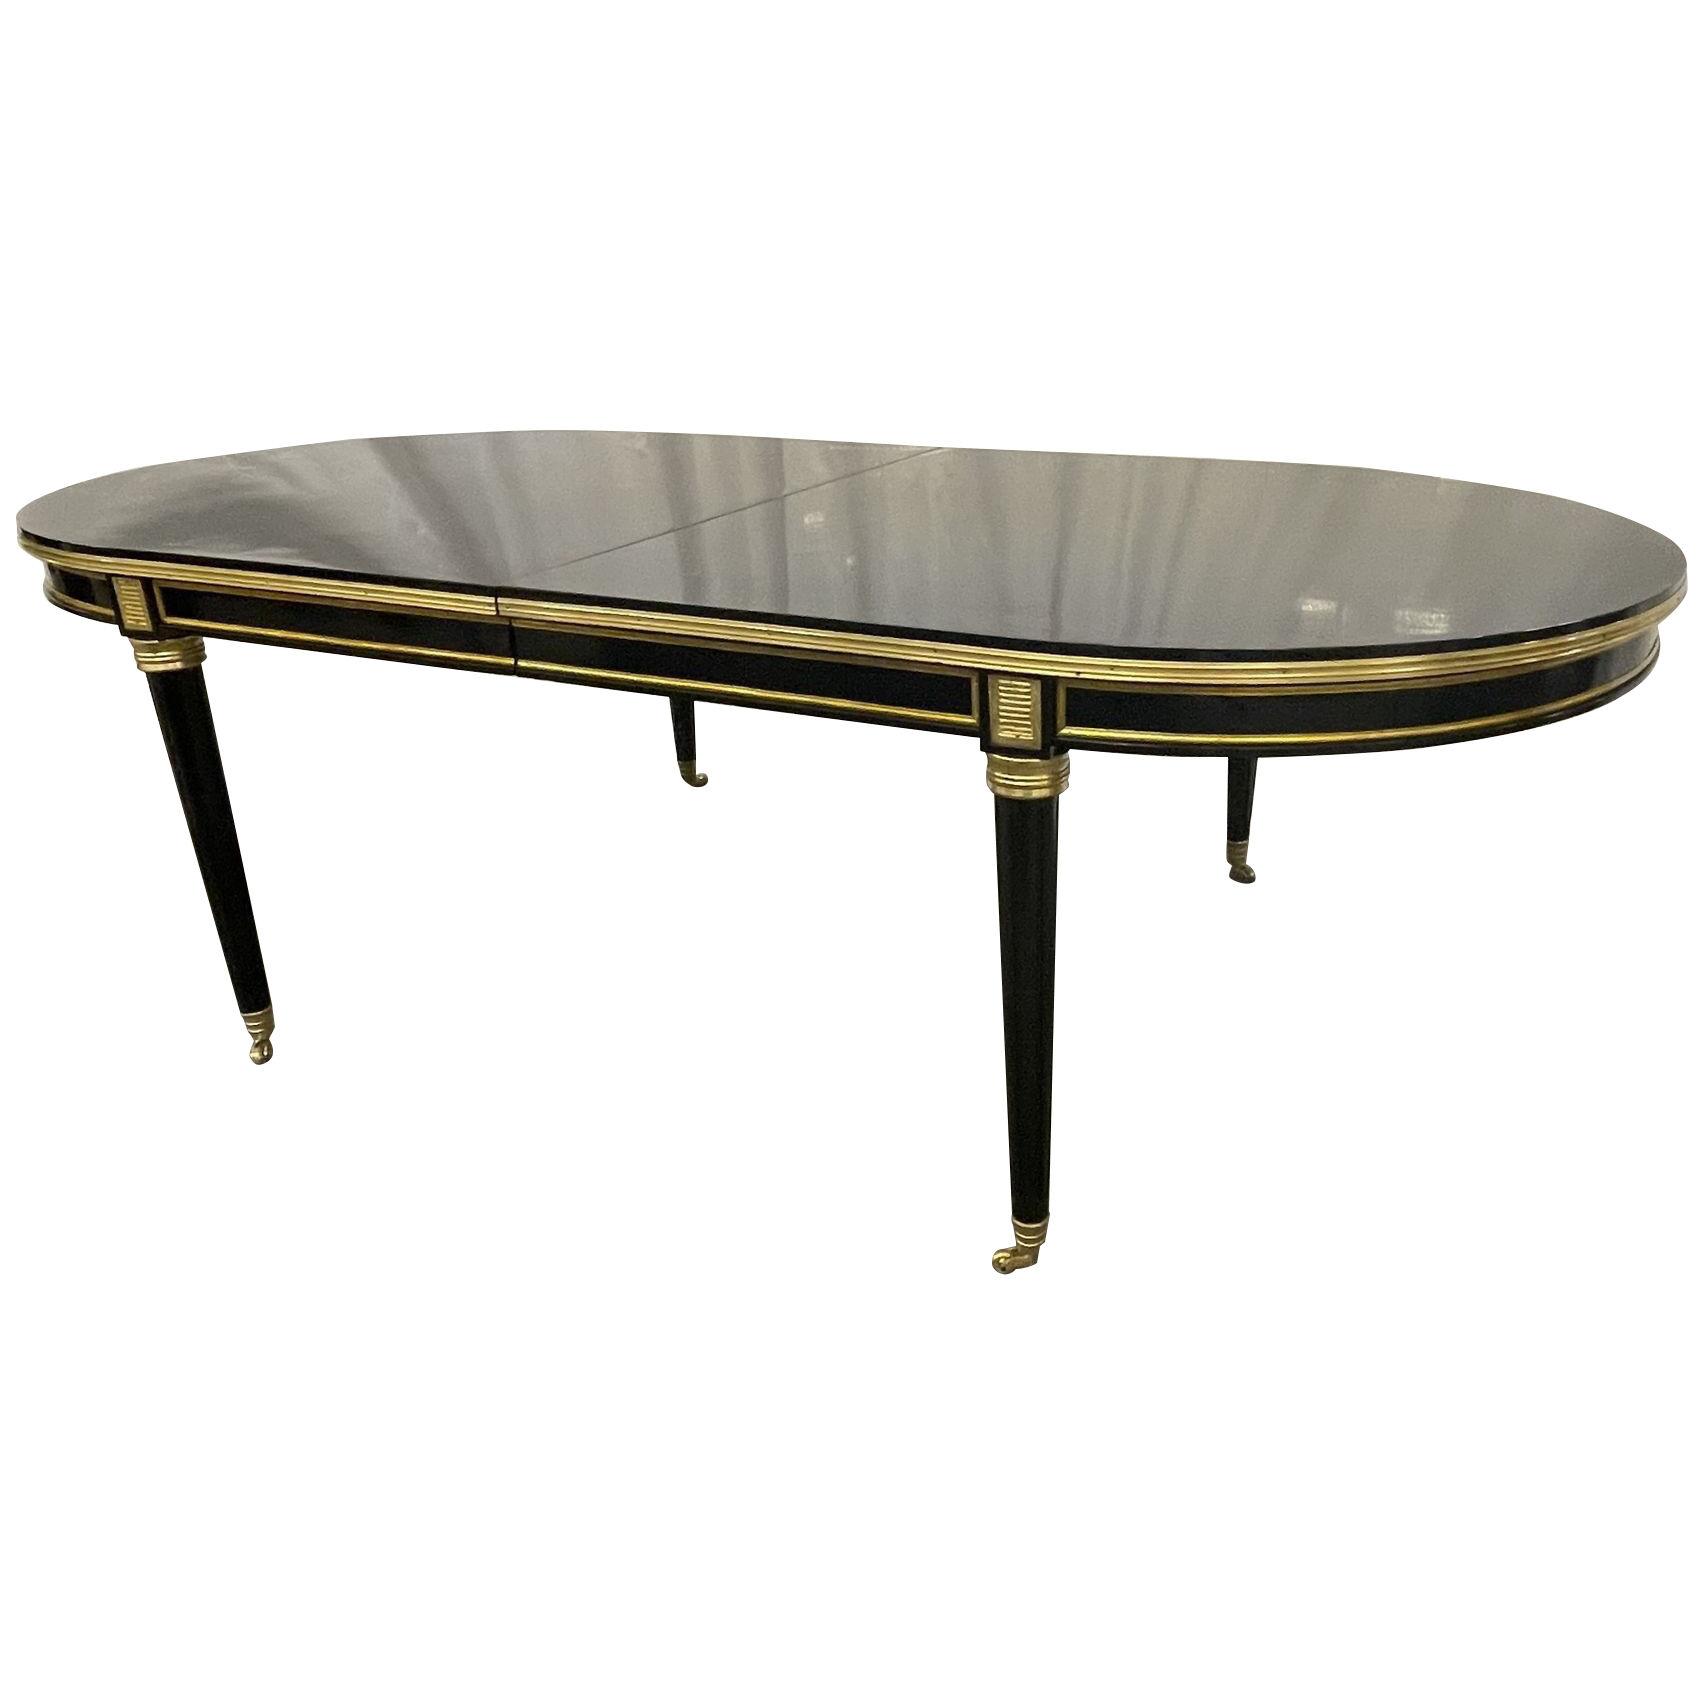 Dining Table, Louis XVI Maison Jansen Style, Black Lacquer, 15 Feet, Refinished